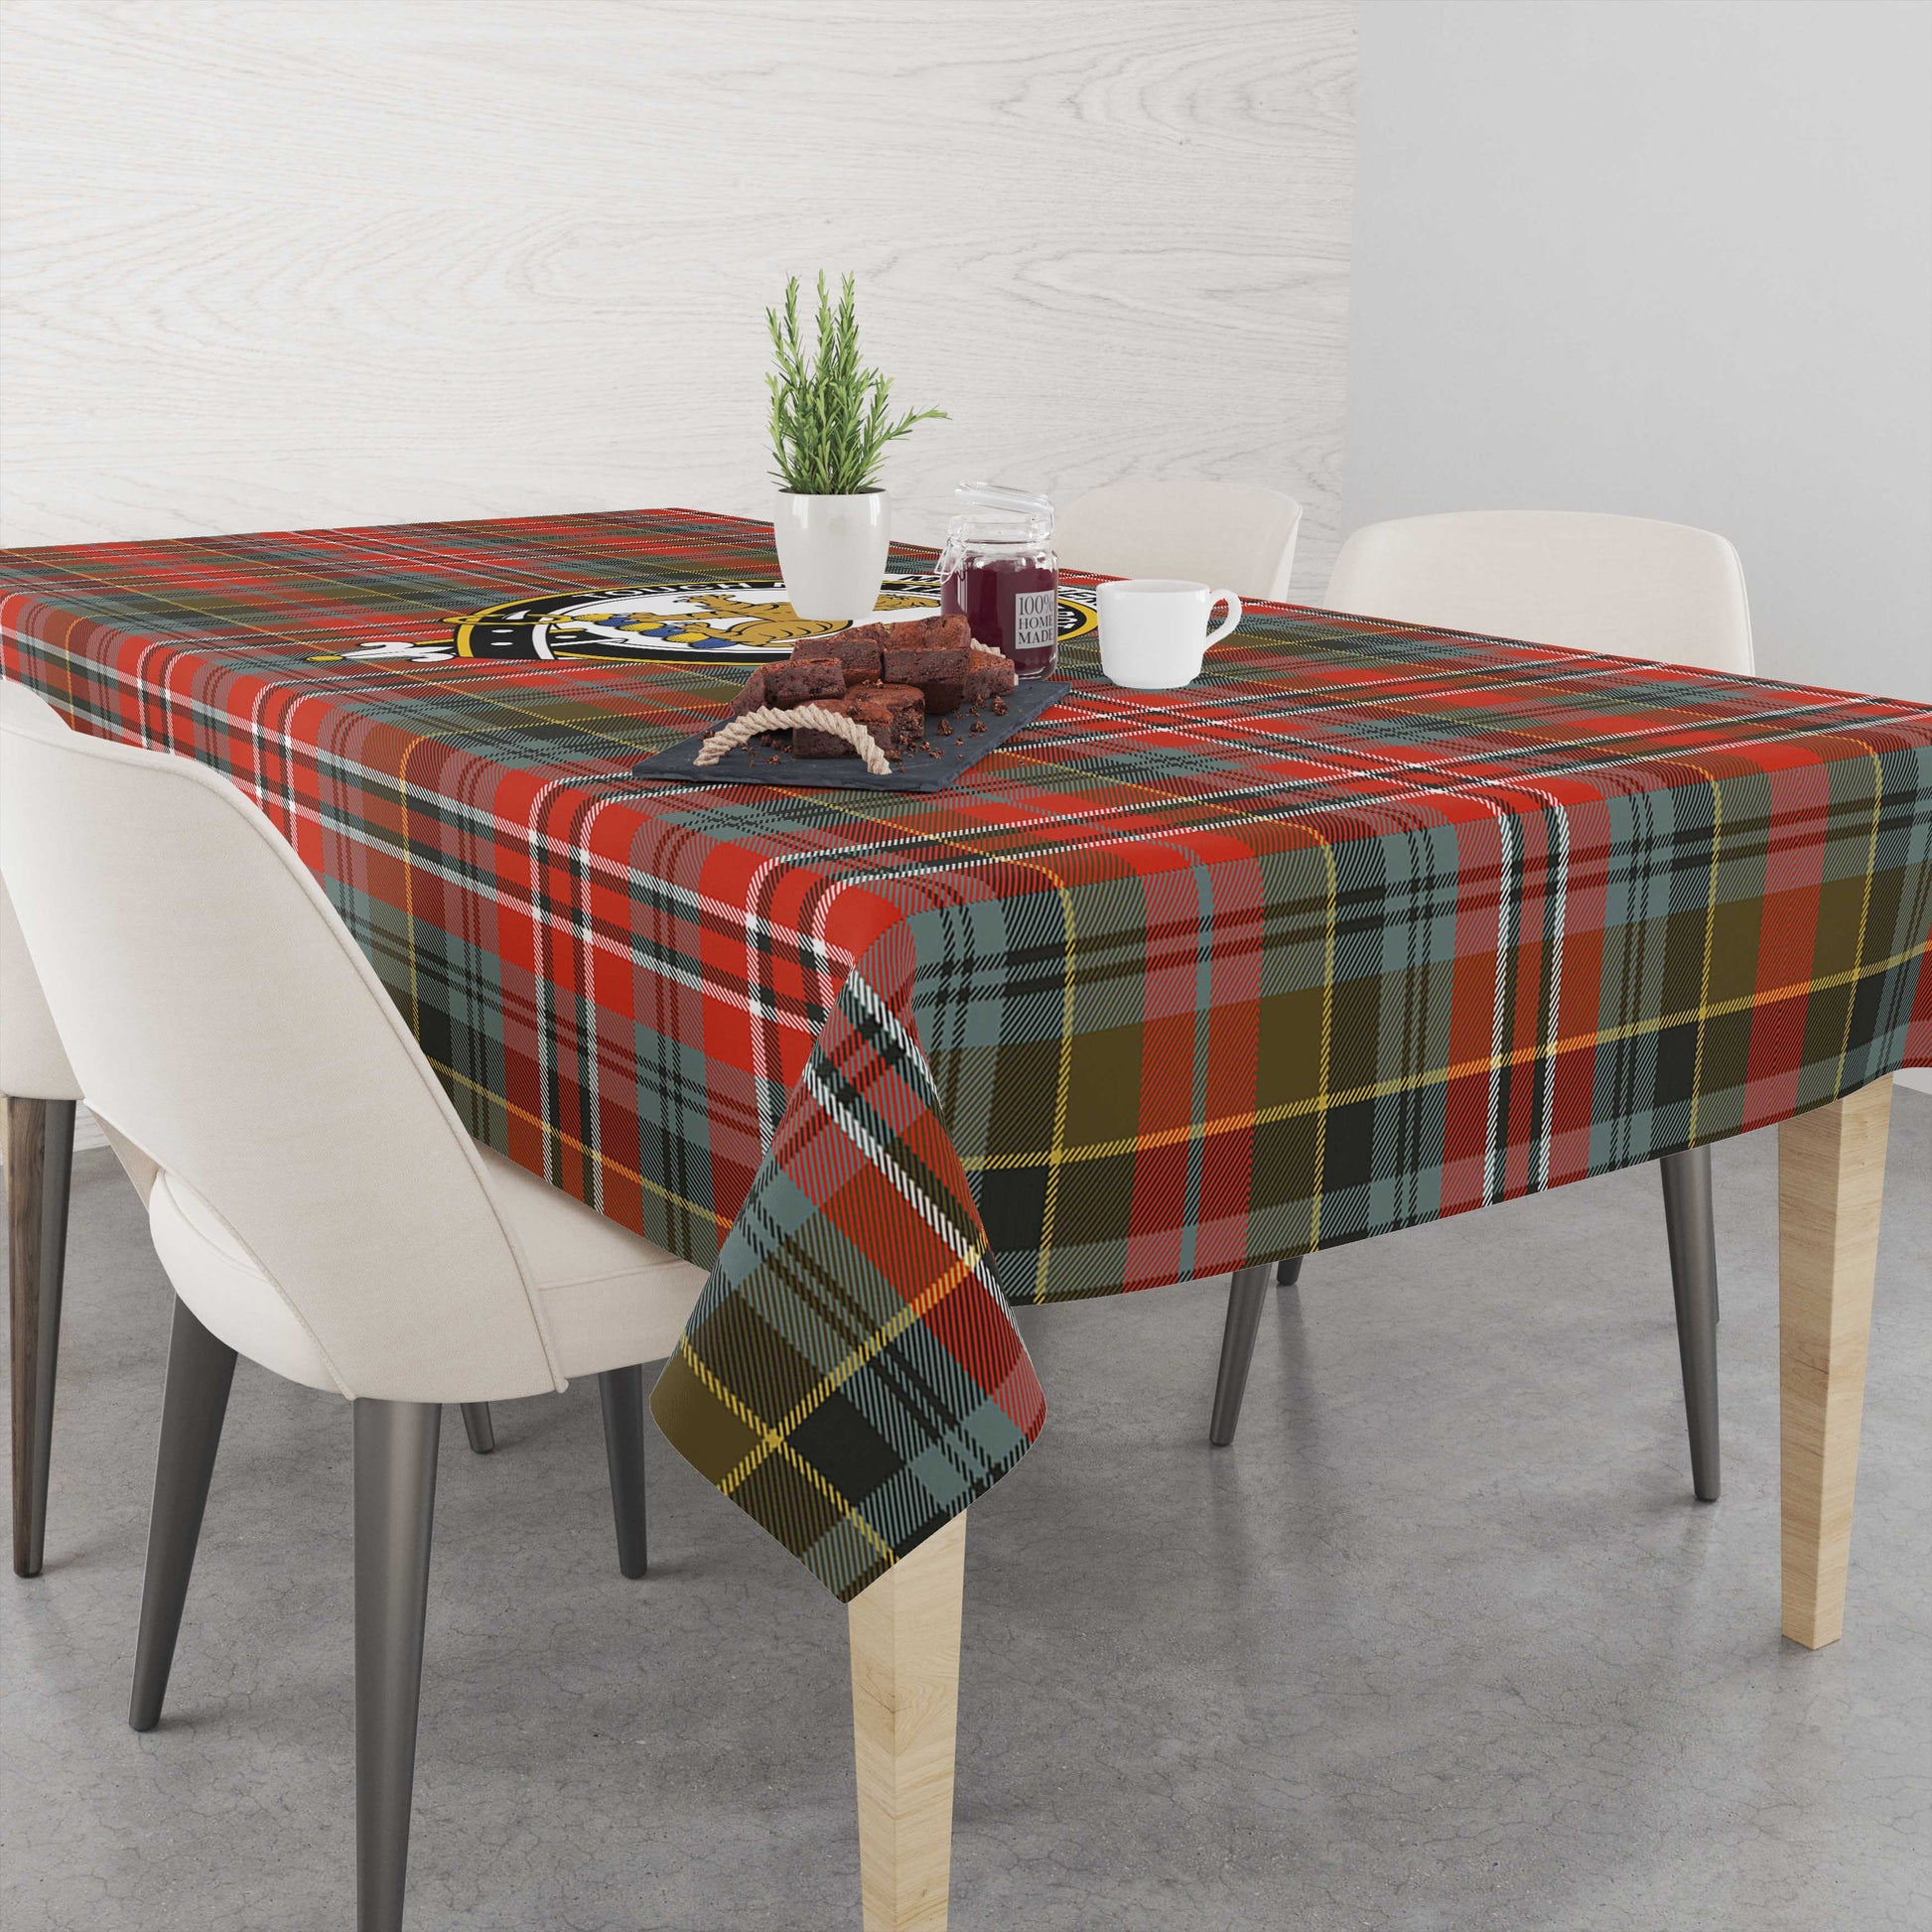 macpherson-weathered-tatan-tablecloth-with-family-crest